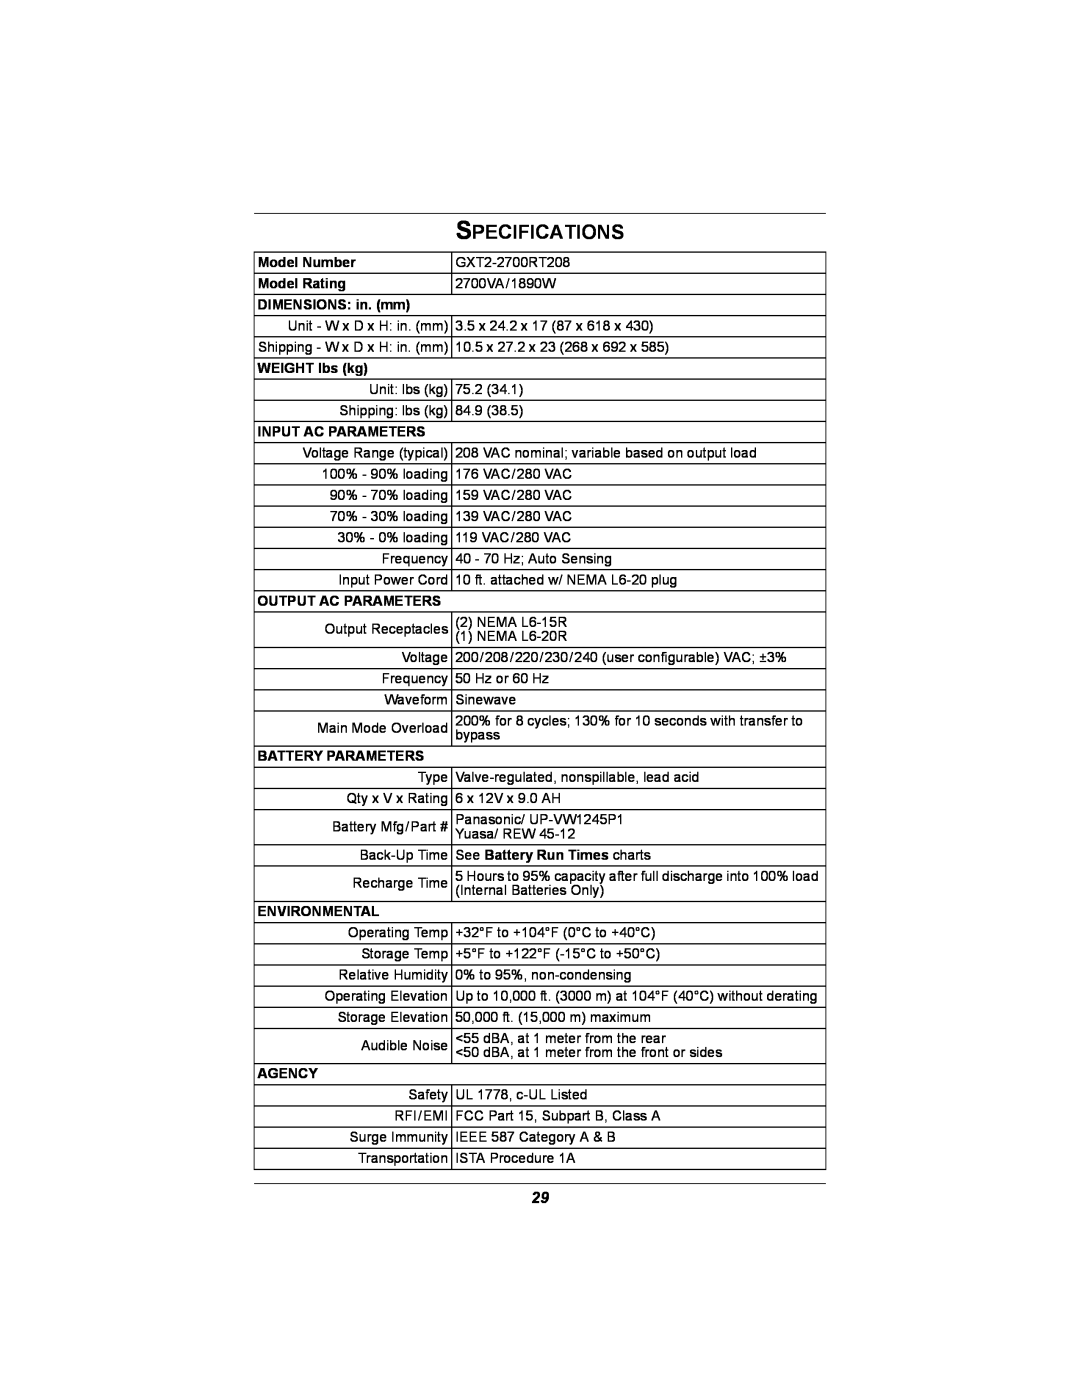 Emerson GXT2U user manual Specifications 